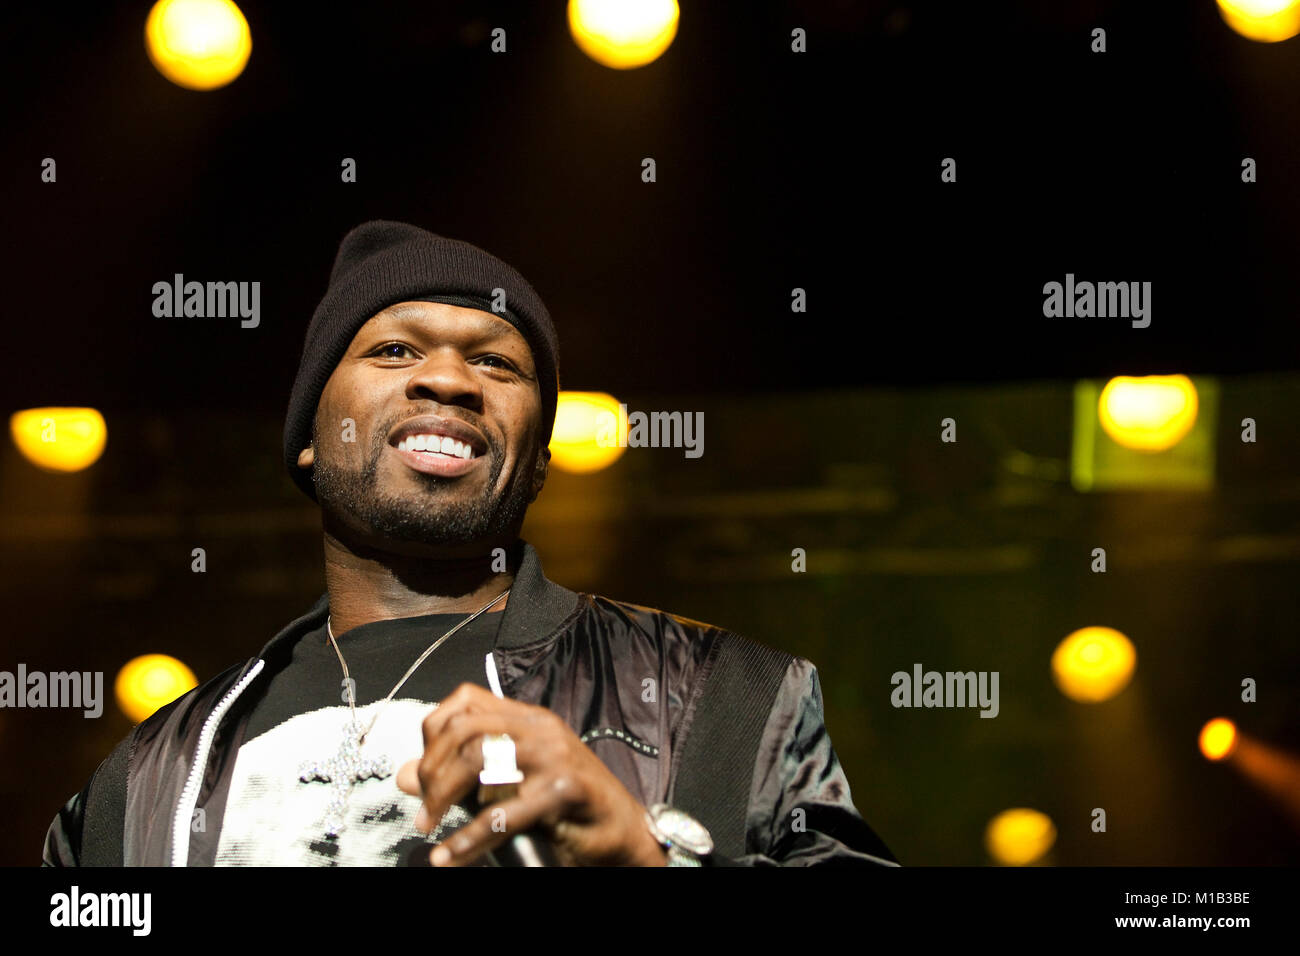 The American rapper, actor and entrepreneur 50 Cent performs a live concert at UKEN 2010 in Bergen. Norway, 11/03 2010. Stock Photo